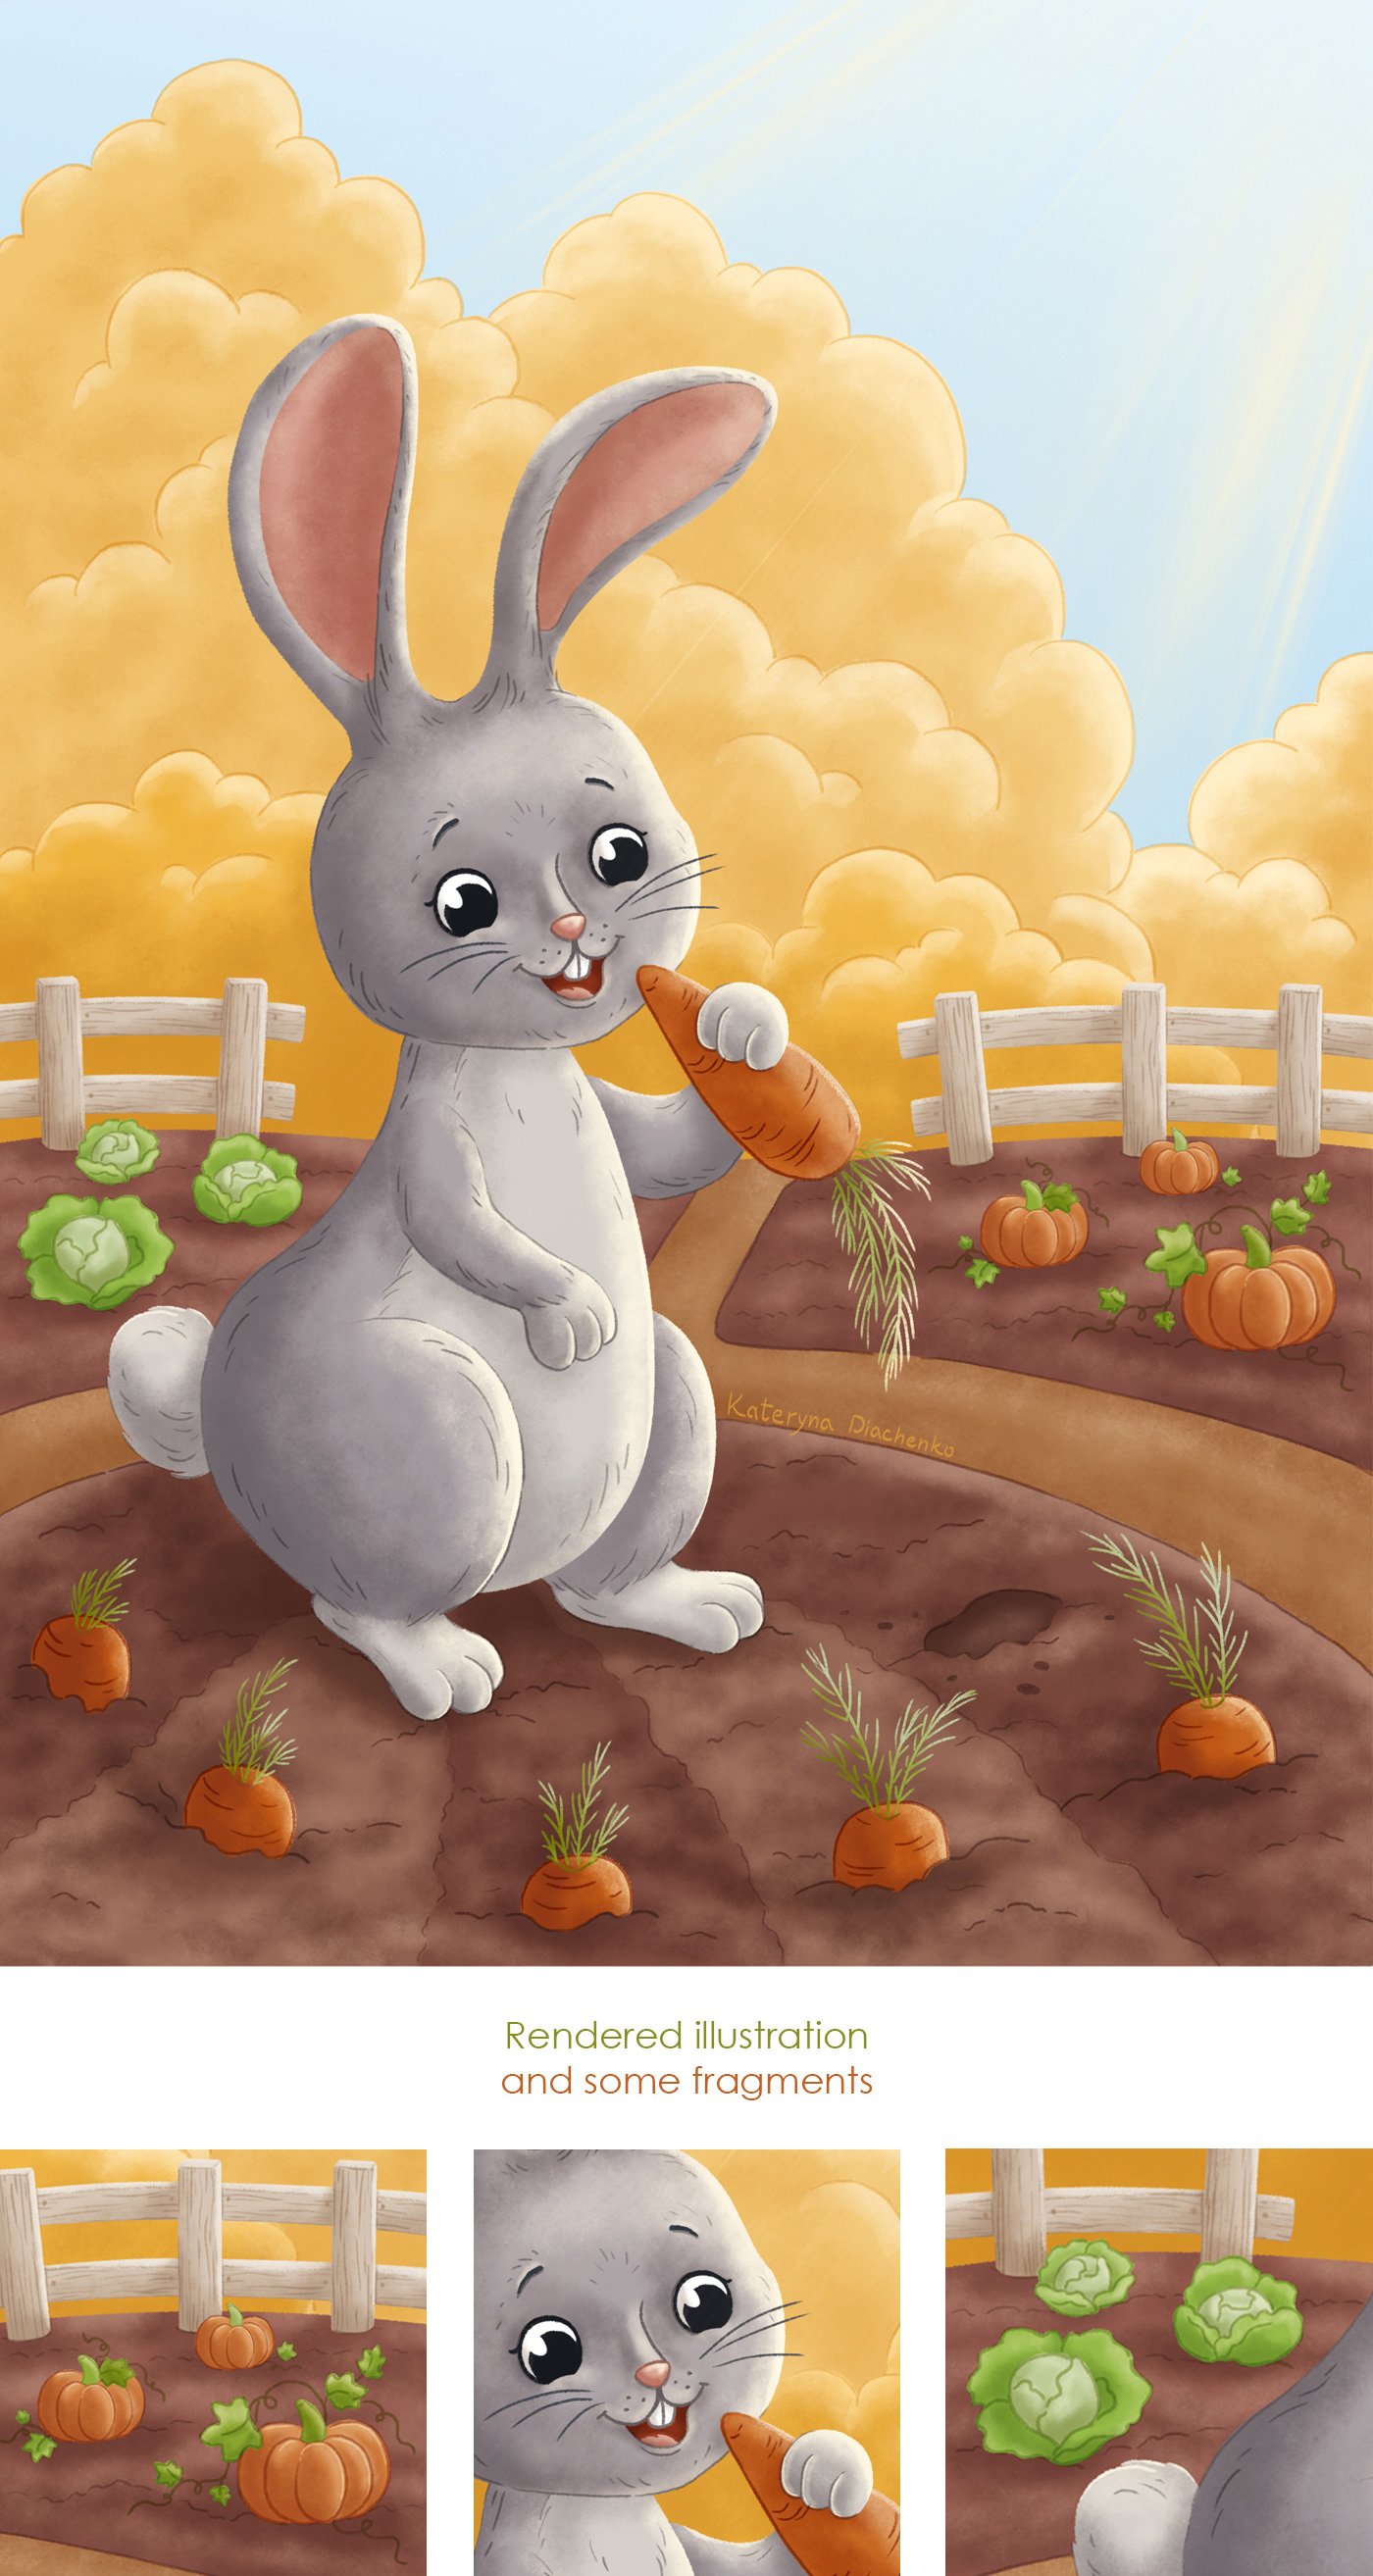 Process of creating children's illustration with Bunny eating a carrot